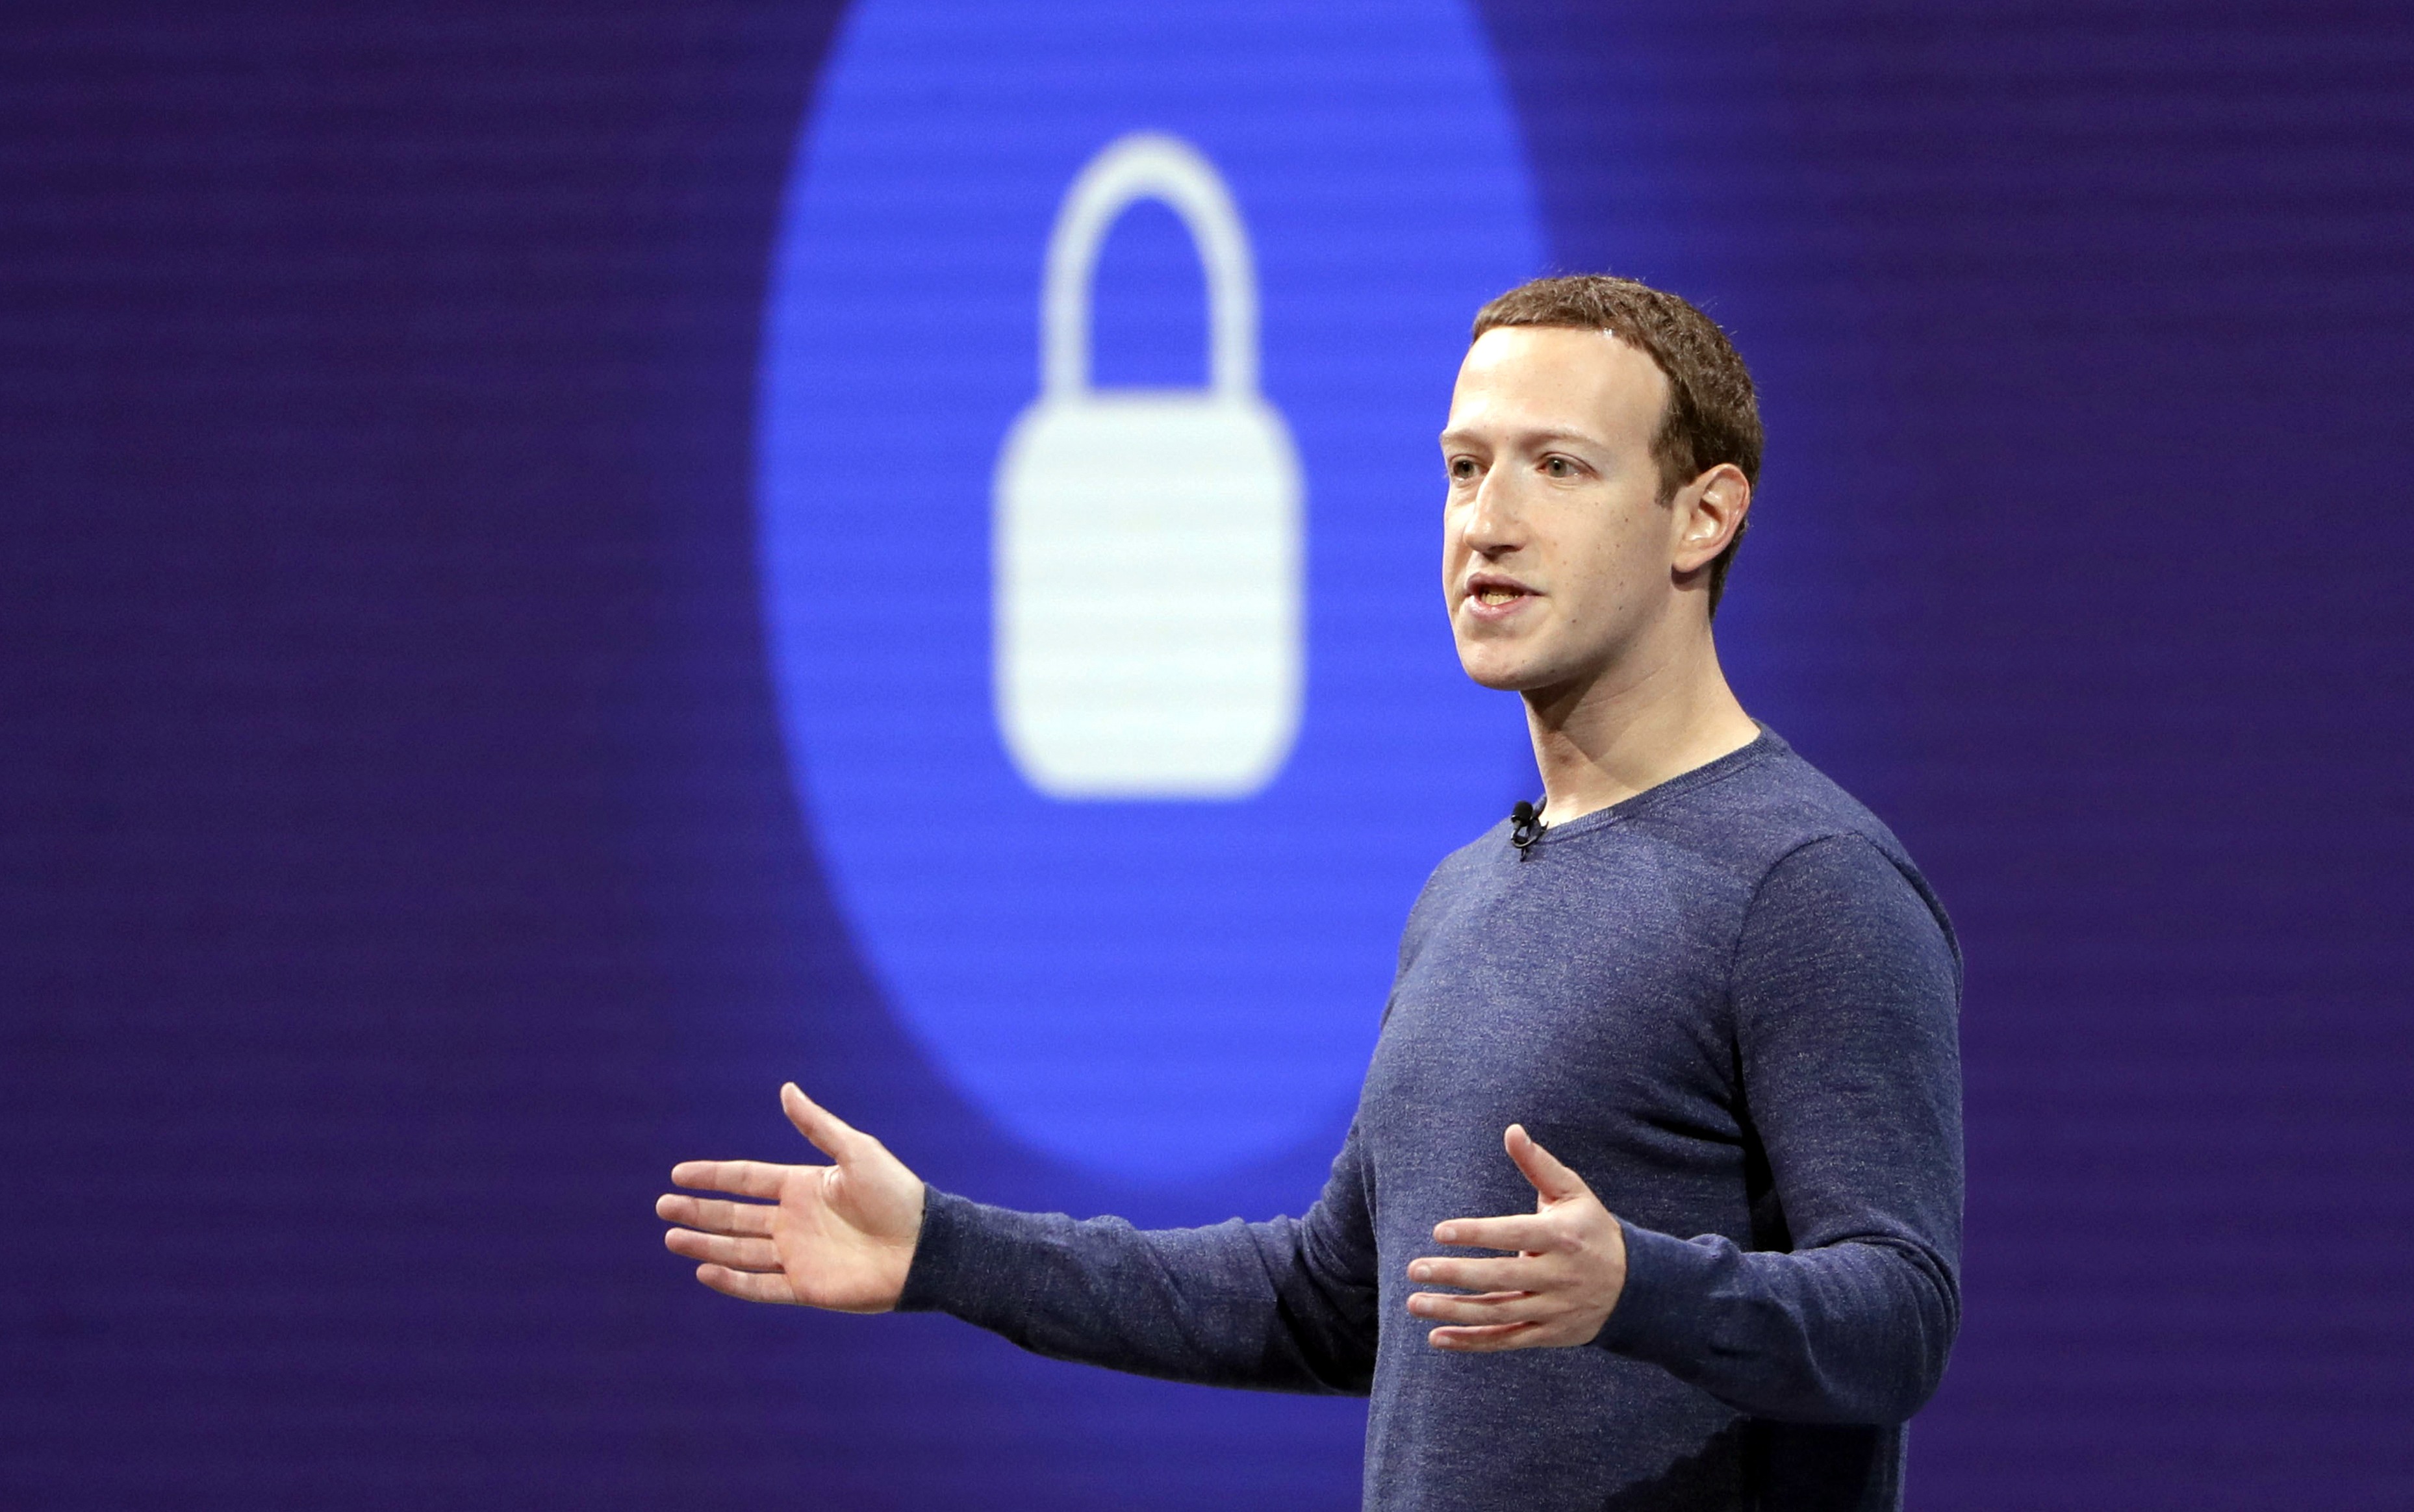 Zuckerberg says Facebook's future is going big on private chats